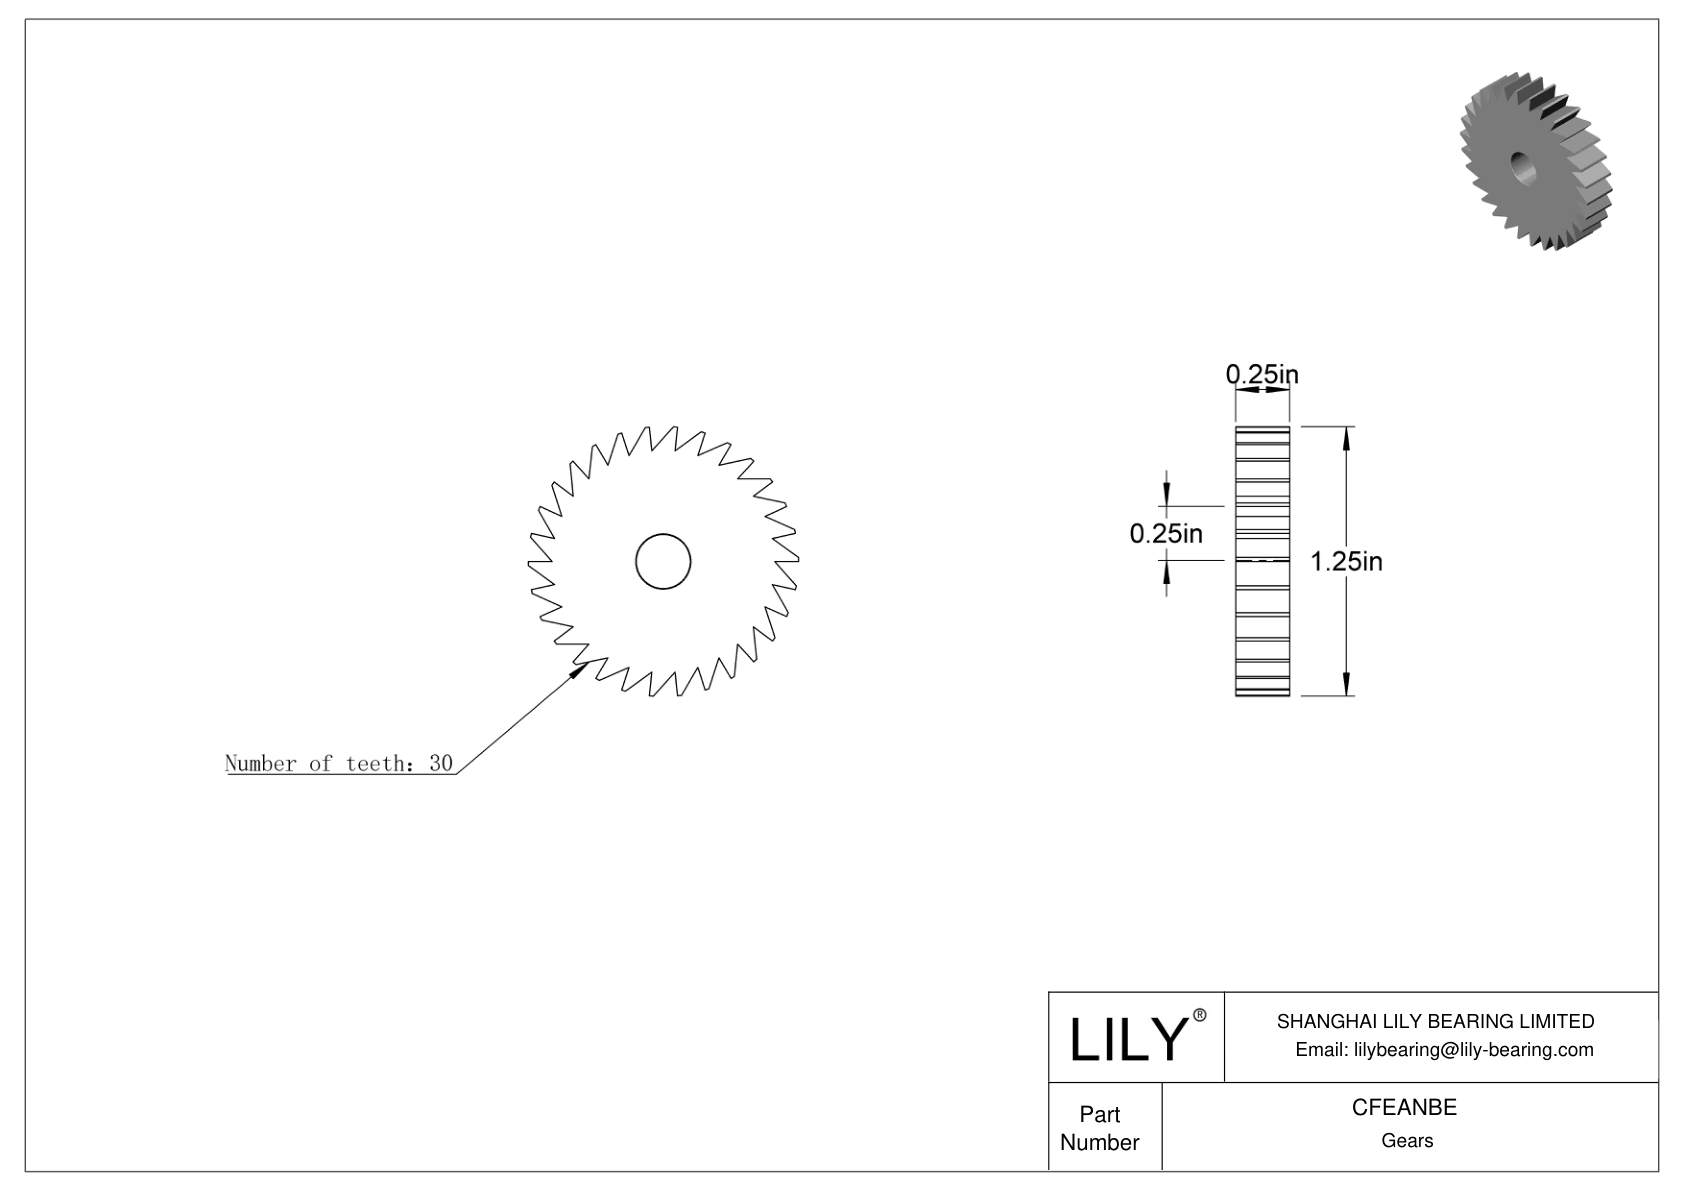 CFEANBE Gears cad drawing